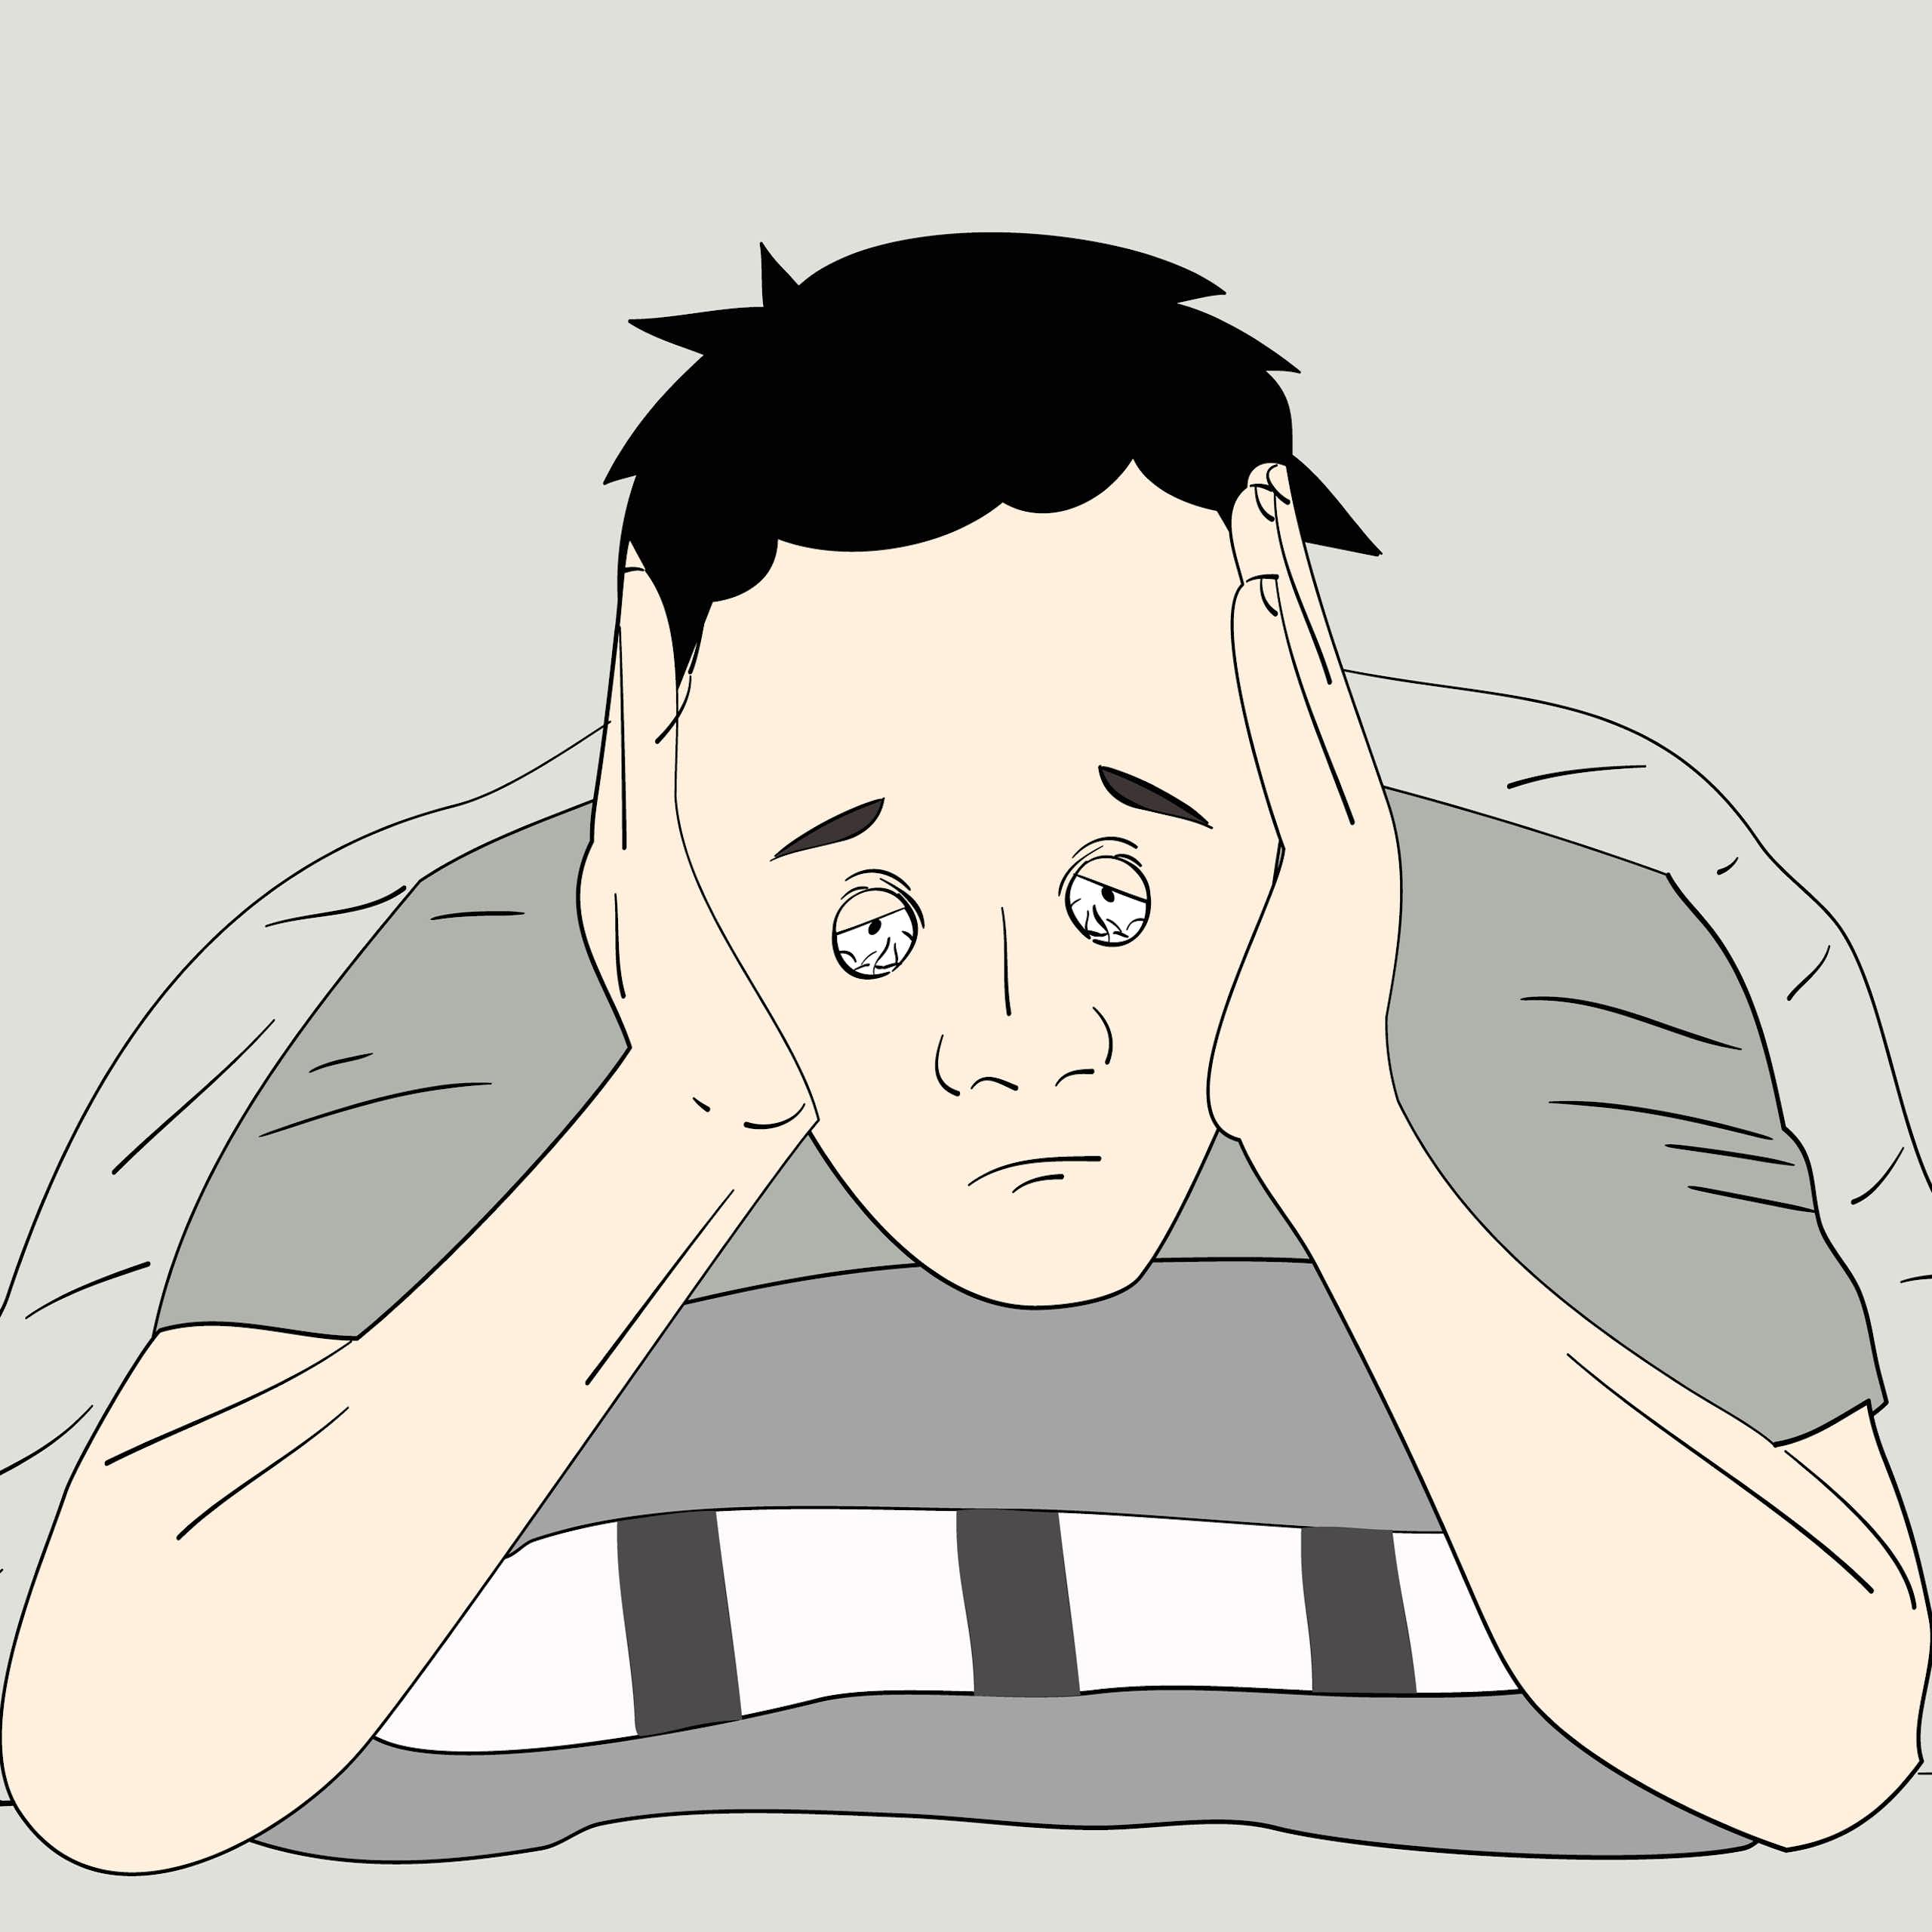 Illustration of tired-looking man suffering from insomnia